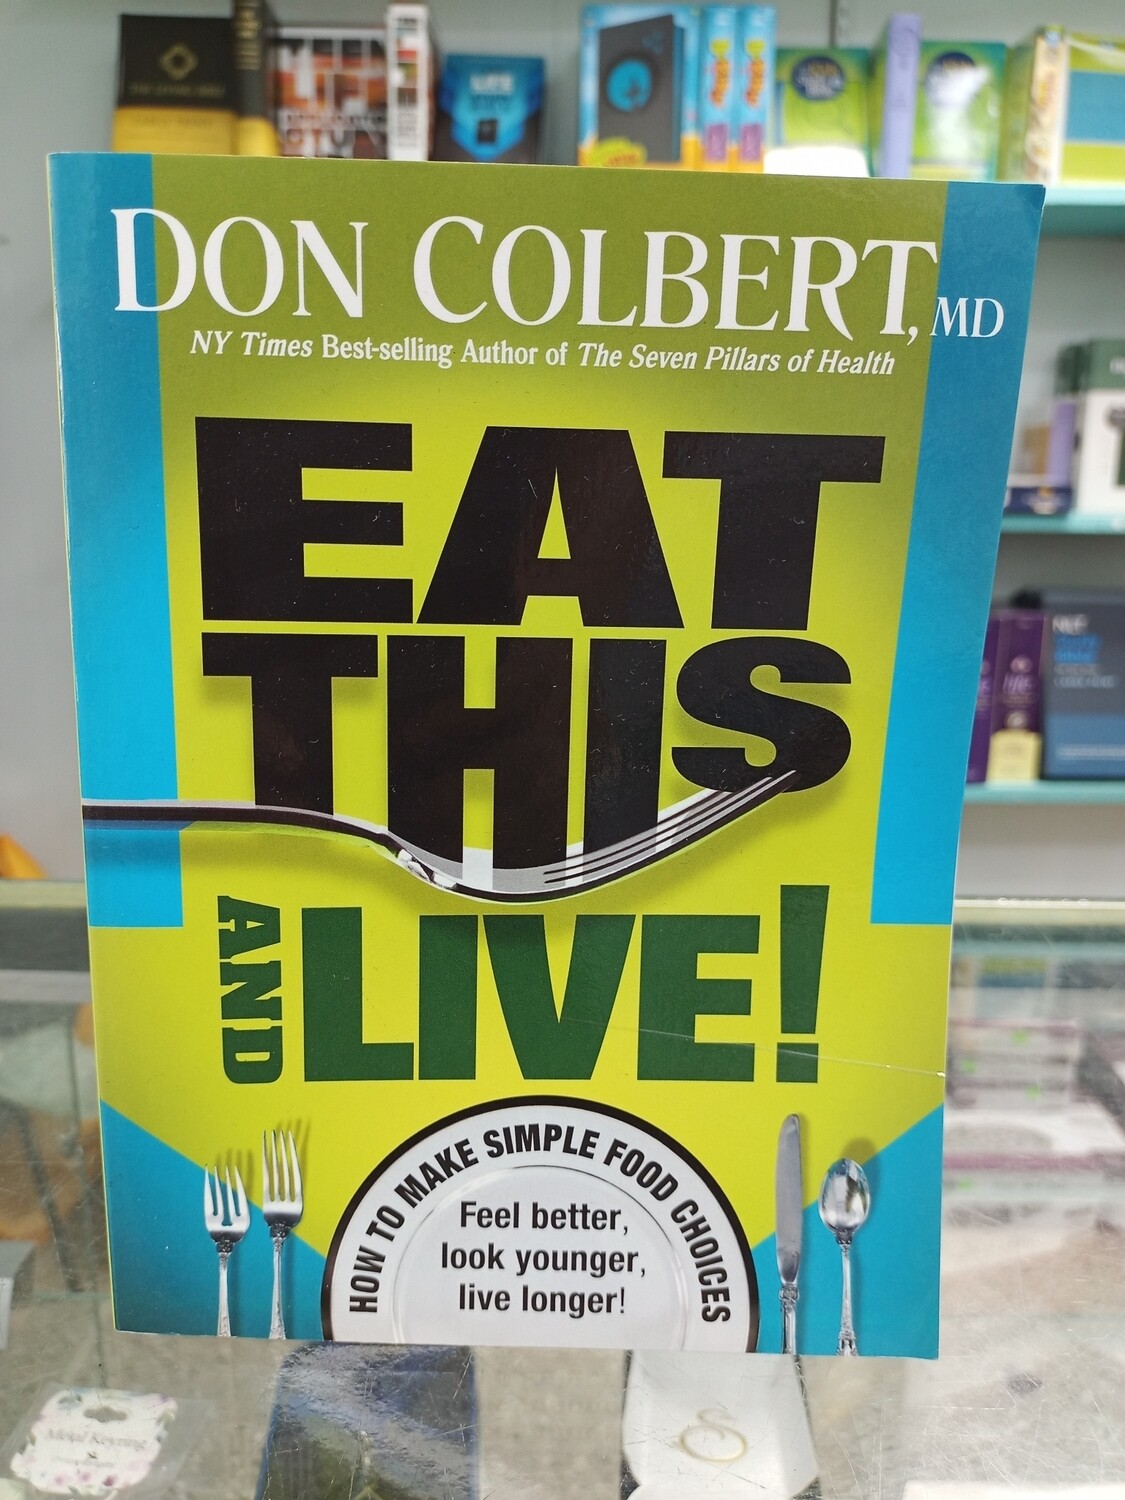 Eat this and live by Don Colbert MD